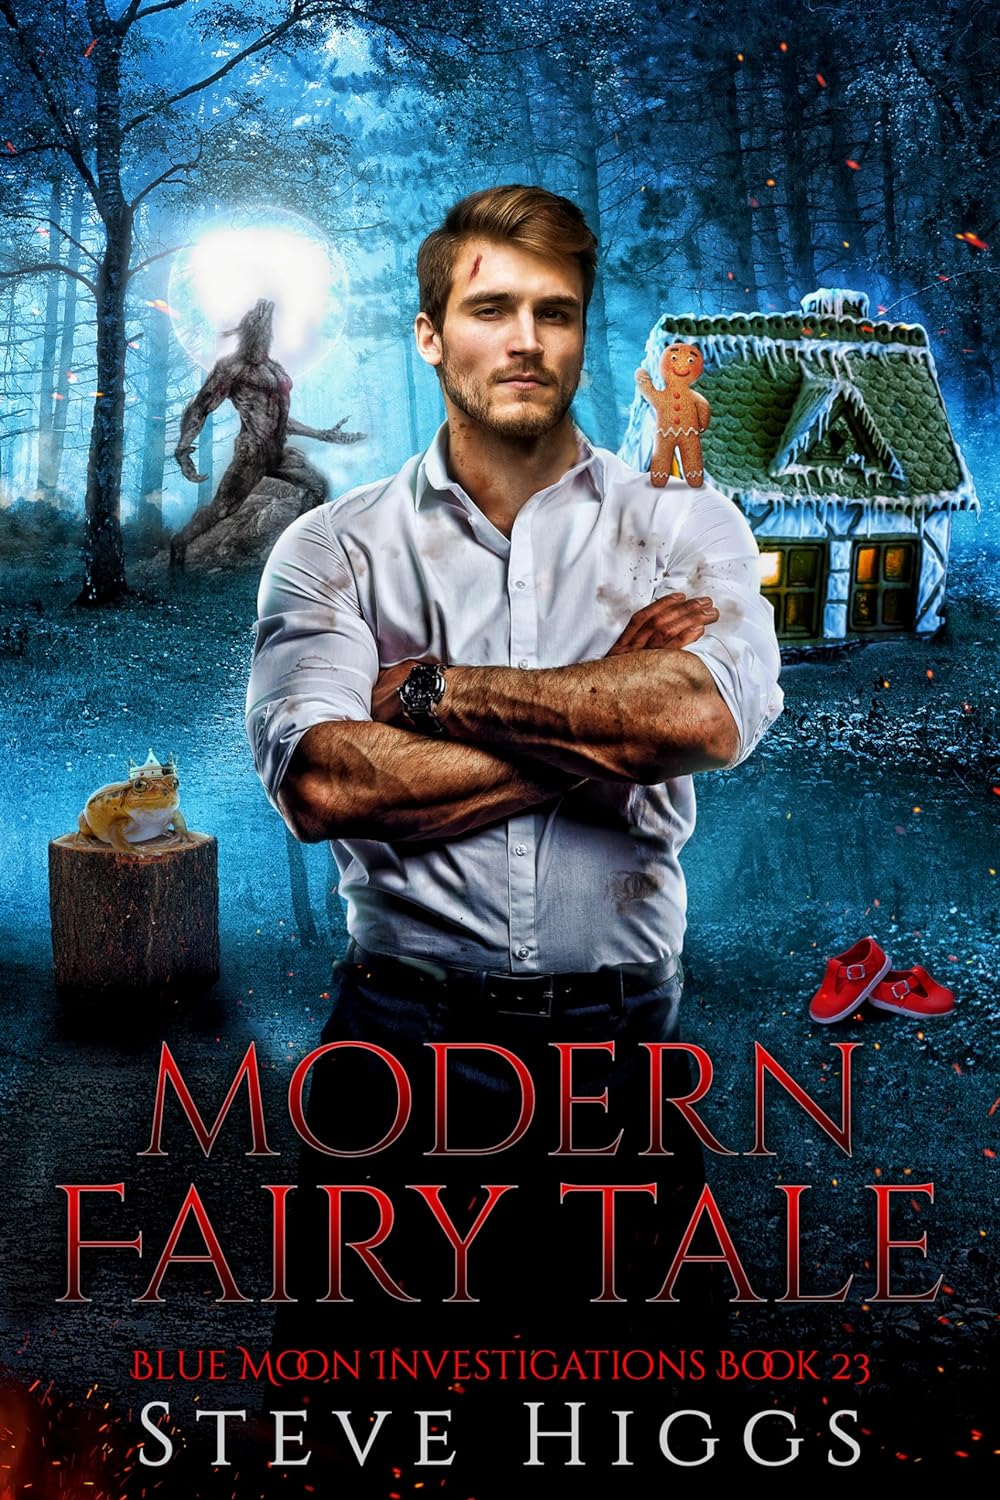 Modern Fairy Tale : Blue Moon Investigations Book 23